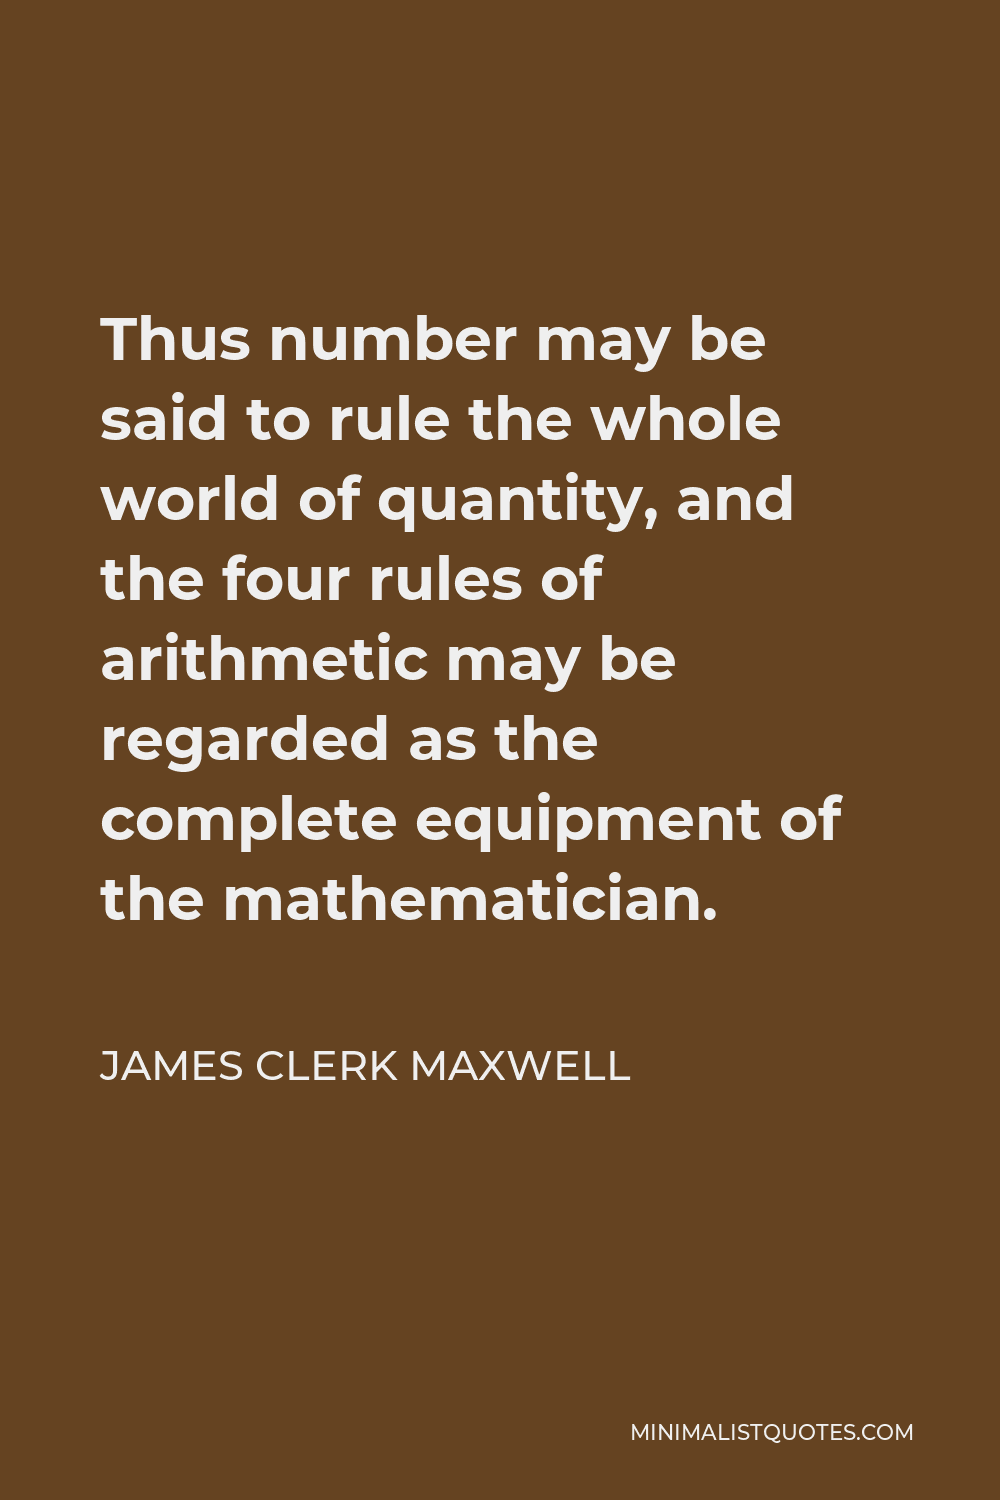 James Clerk Maxwell Quote - Thus number may be said to rule the whole world of quantity, and the four rules of arithmetic may be regarded as the complete equipment of the mathematician.